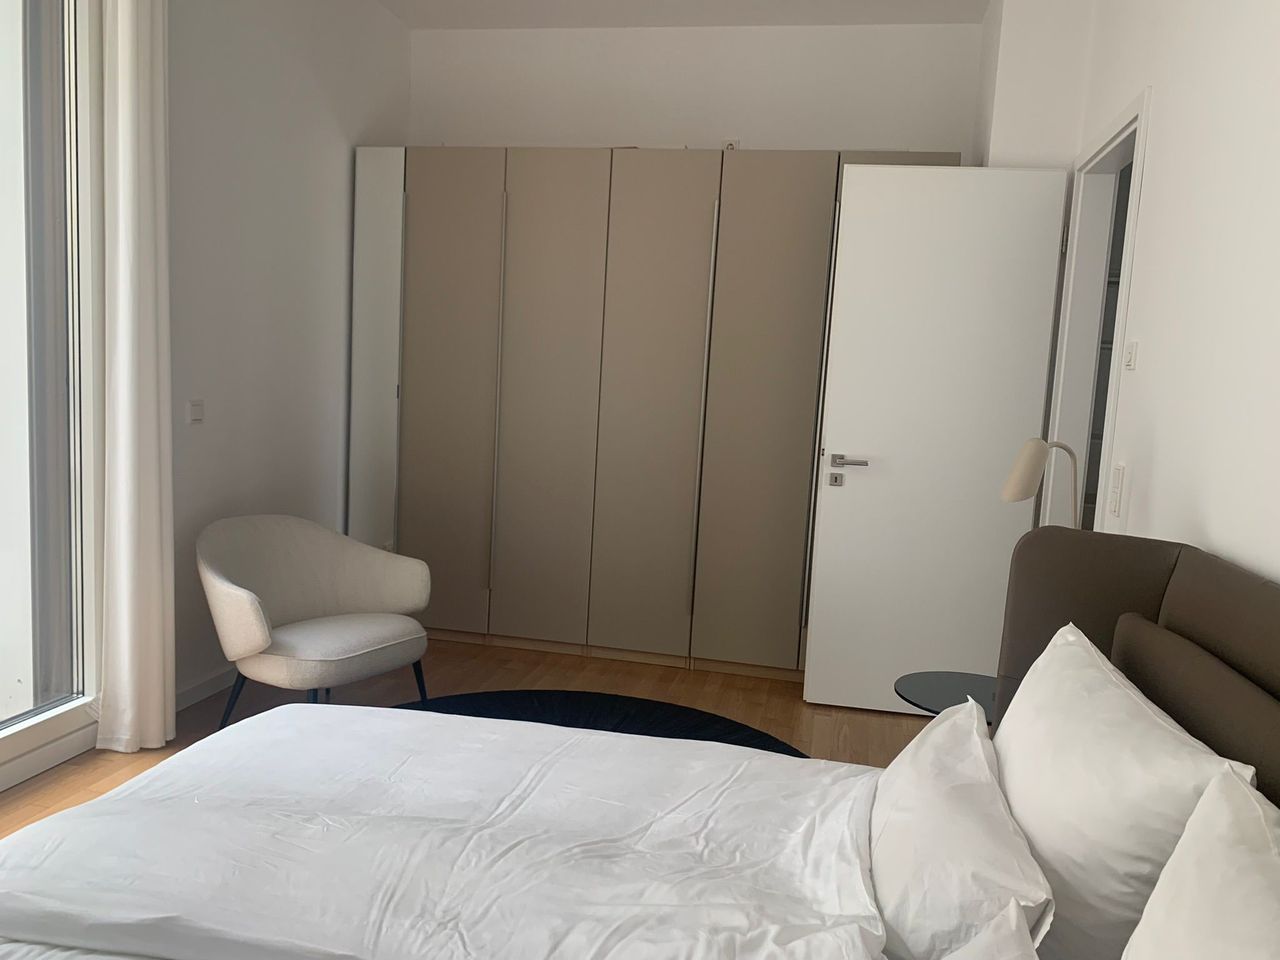 133 | Gorgeous modern one room apartment near Berlin Central Station